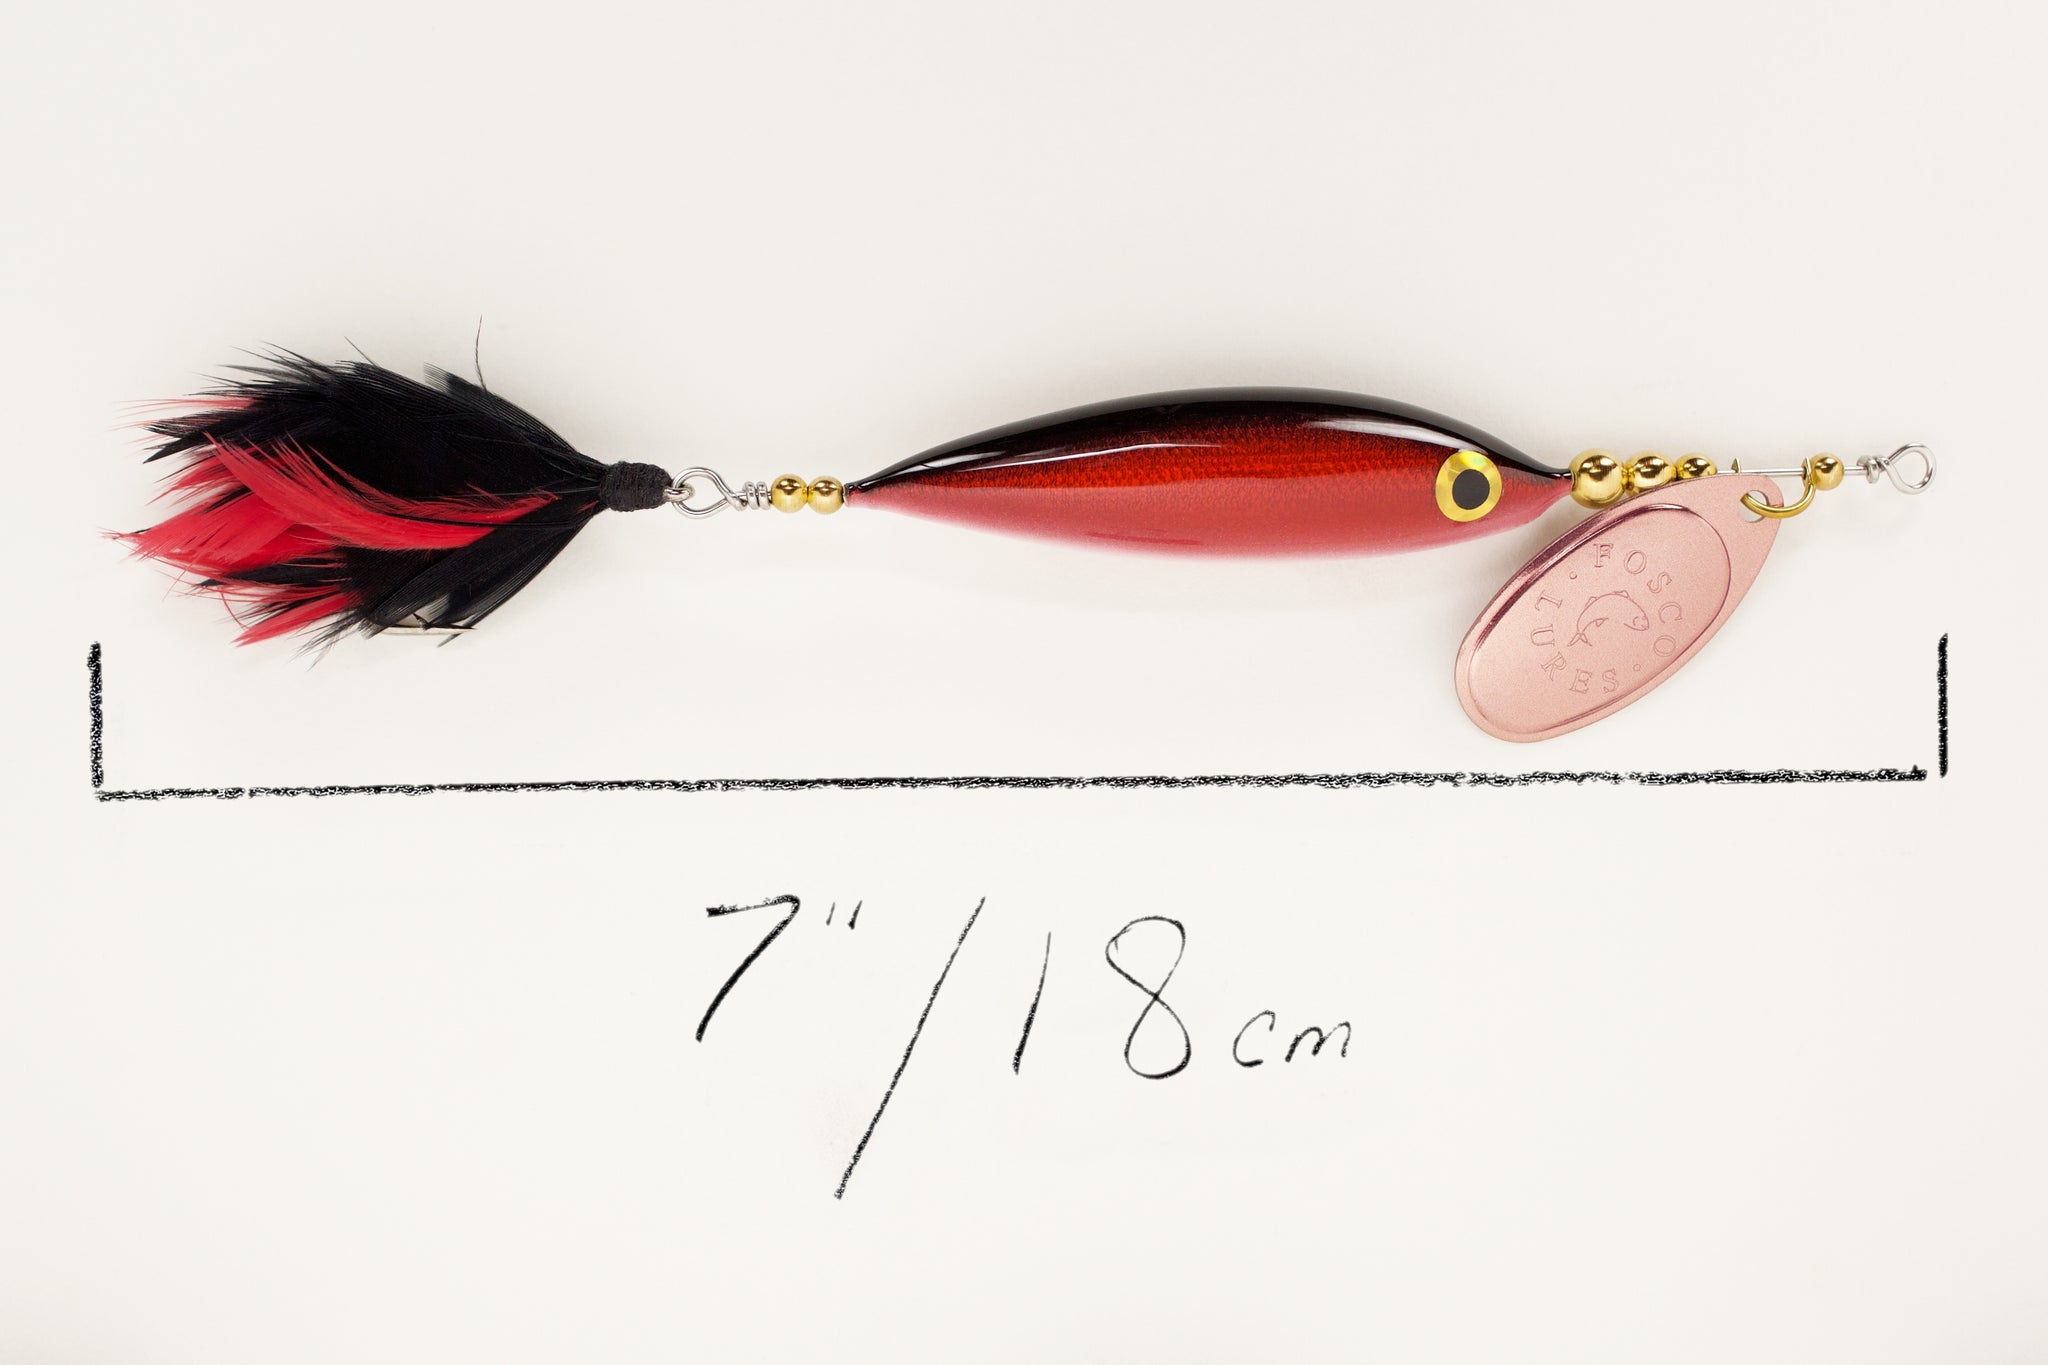 Fosco Handmade Minnow Spinner • Made in Canada • For Bass, Pike, Salmon and  more – Fosco Fishing Lures